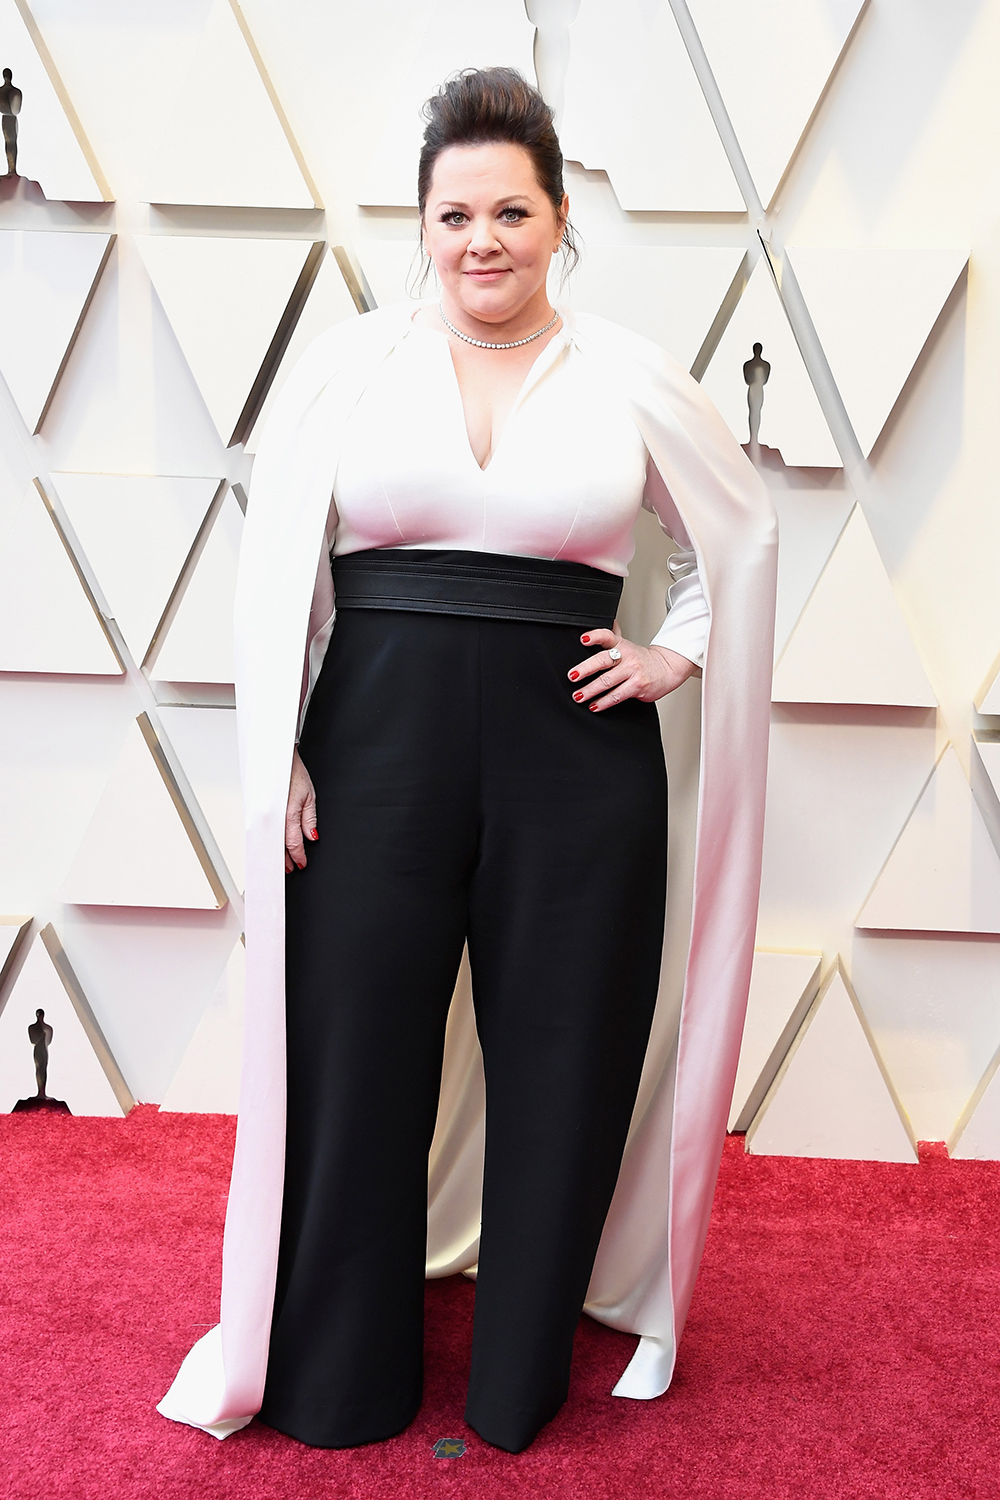 HOLLYWOOD, CA - FEBRUARY 24: Melissa McCarthy attends the 91st Annual Academy Awards at Hollywood and Highland on February 24, 2019 in Hollywood, California. (Photo by Steve Granitz/WireImage)